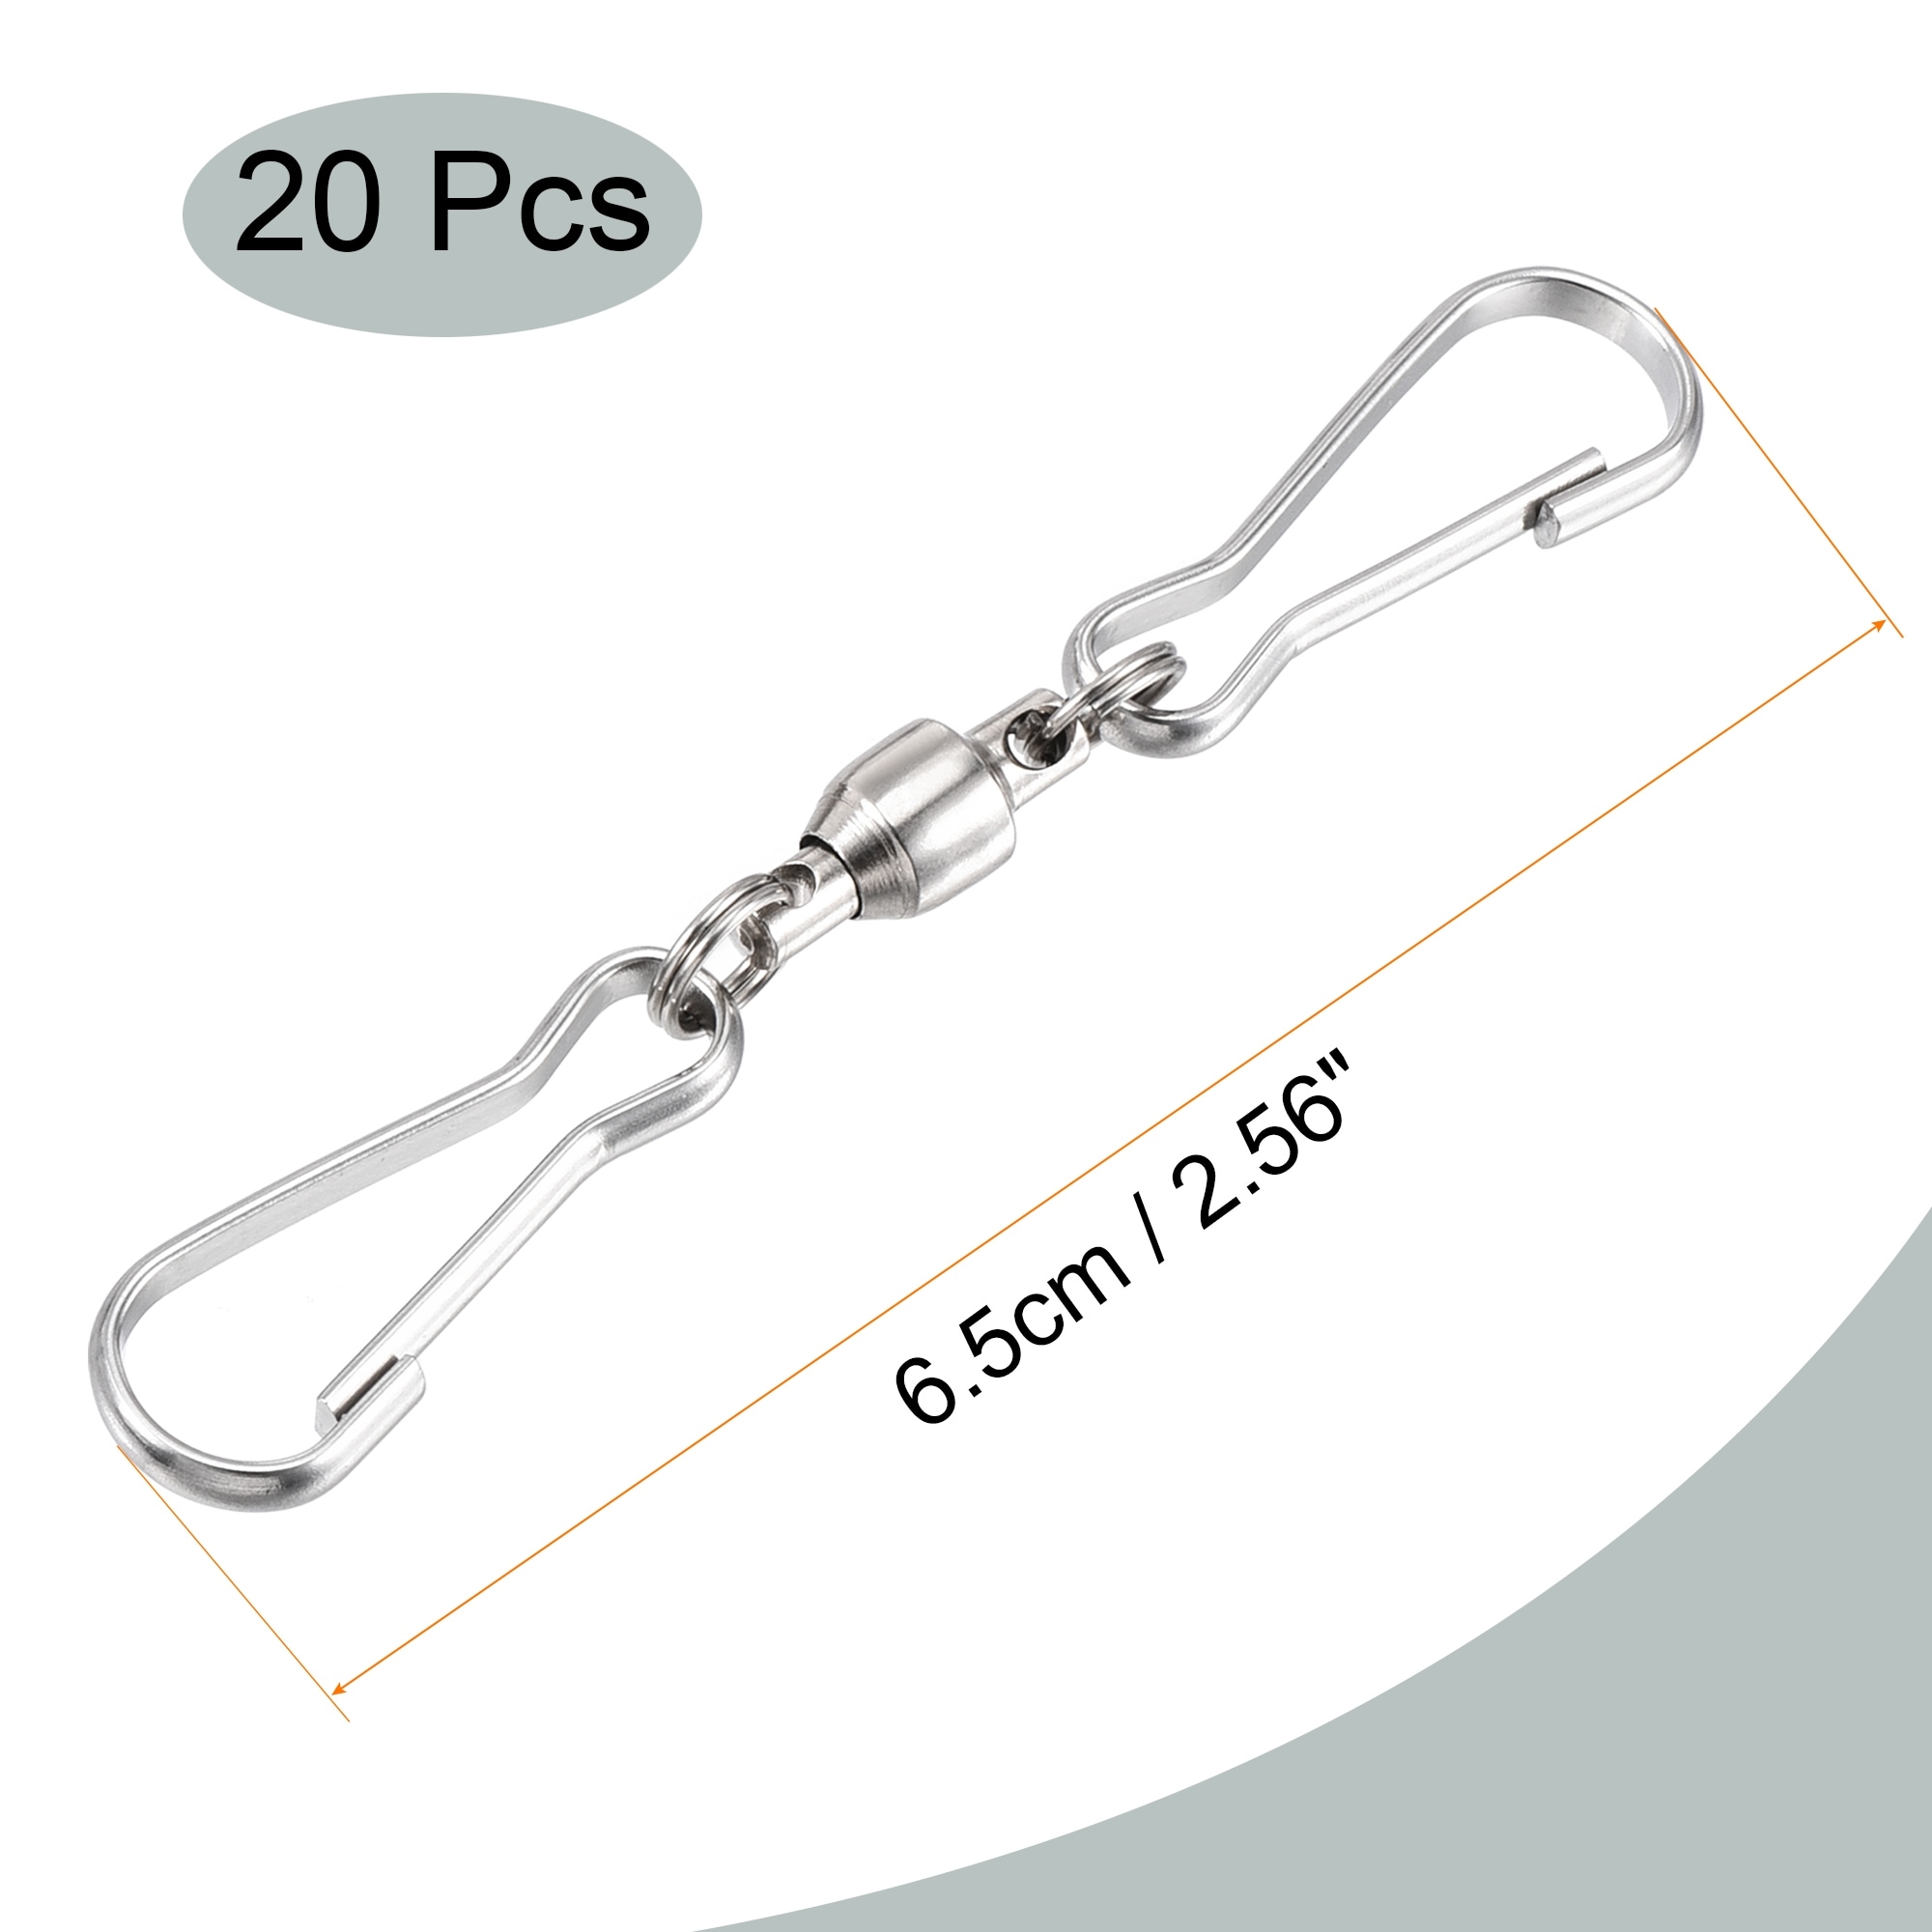 Dual Swivel Clips 6.5cm 360 Degree Rotating Hanging Stainless Steel 20pcs -  Silver Tone - Bed Bath & Beyond - 37559655